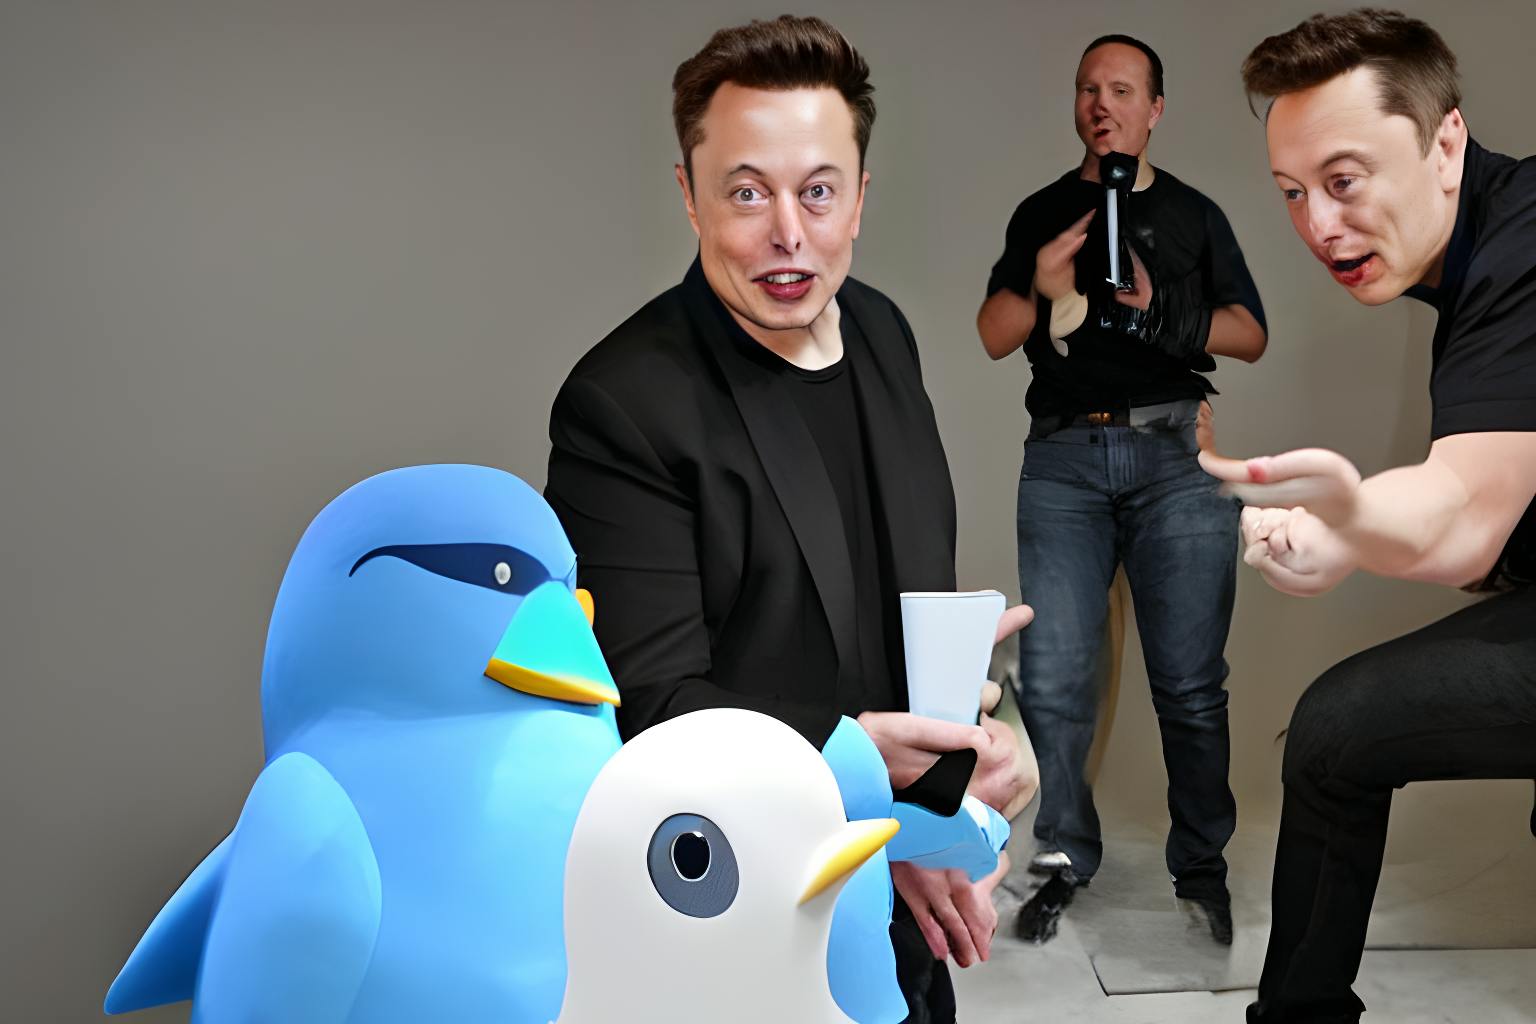 featured image - How Musk became Twitter's largest shareholder, agreed to join its board, then backed out in 3 weeks